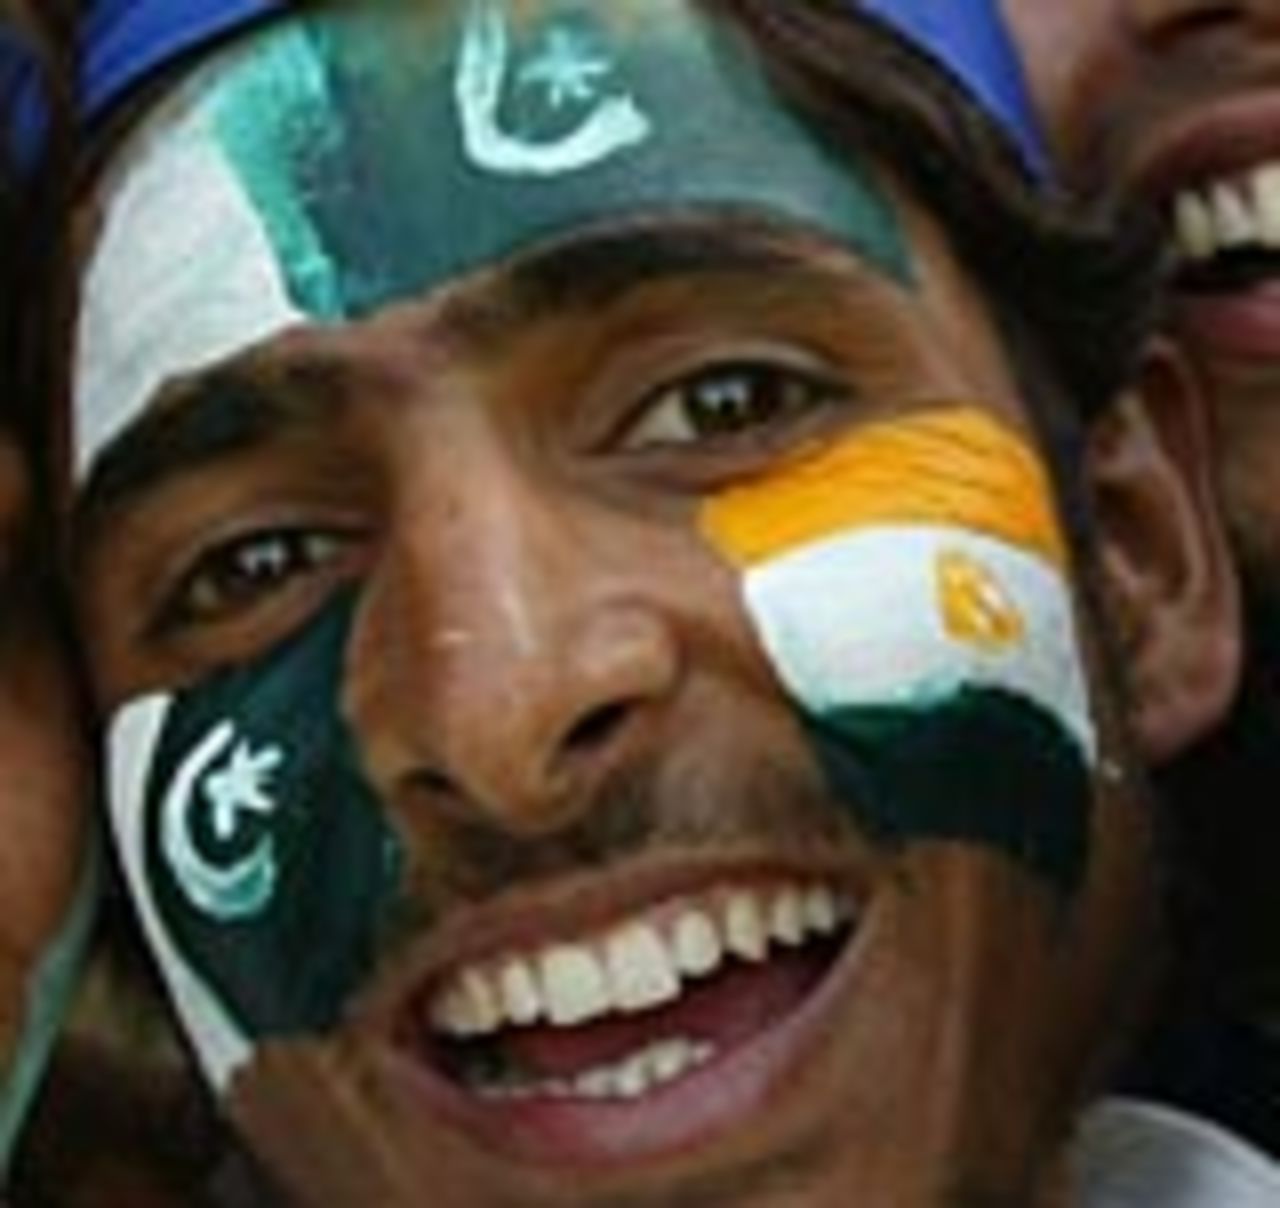 A fan at the cricket, March 14, 2004